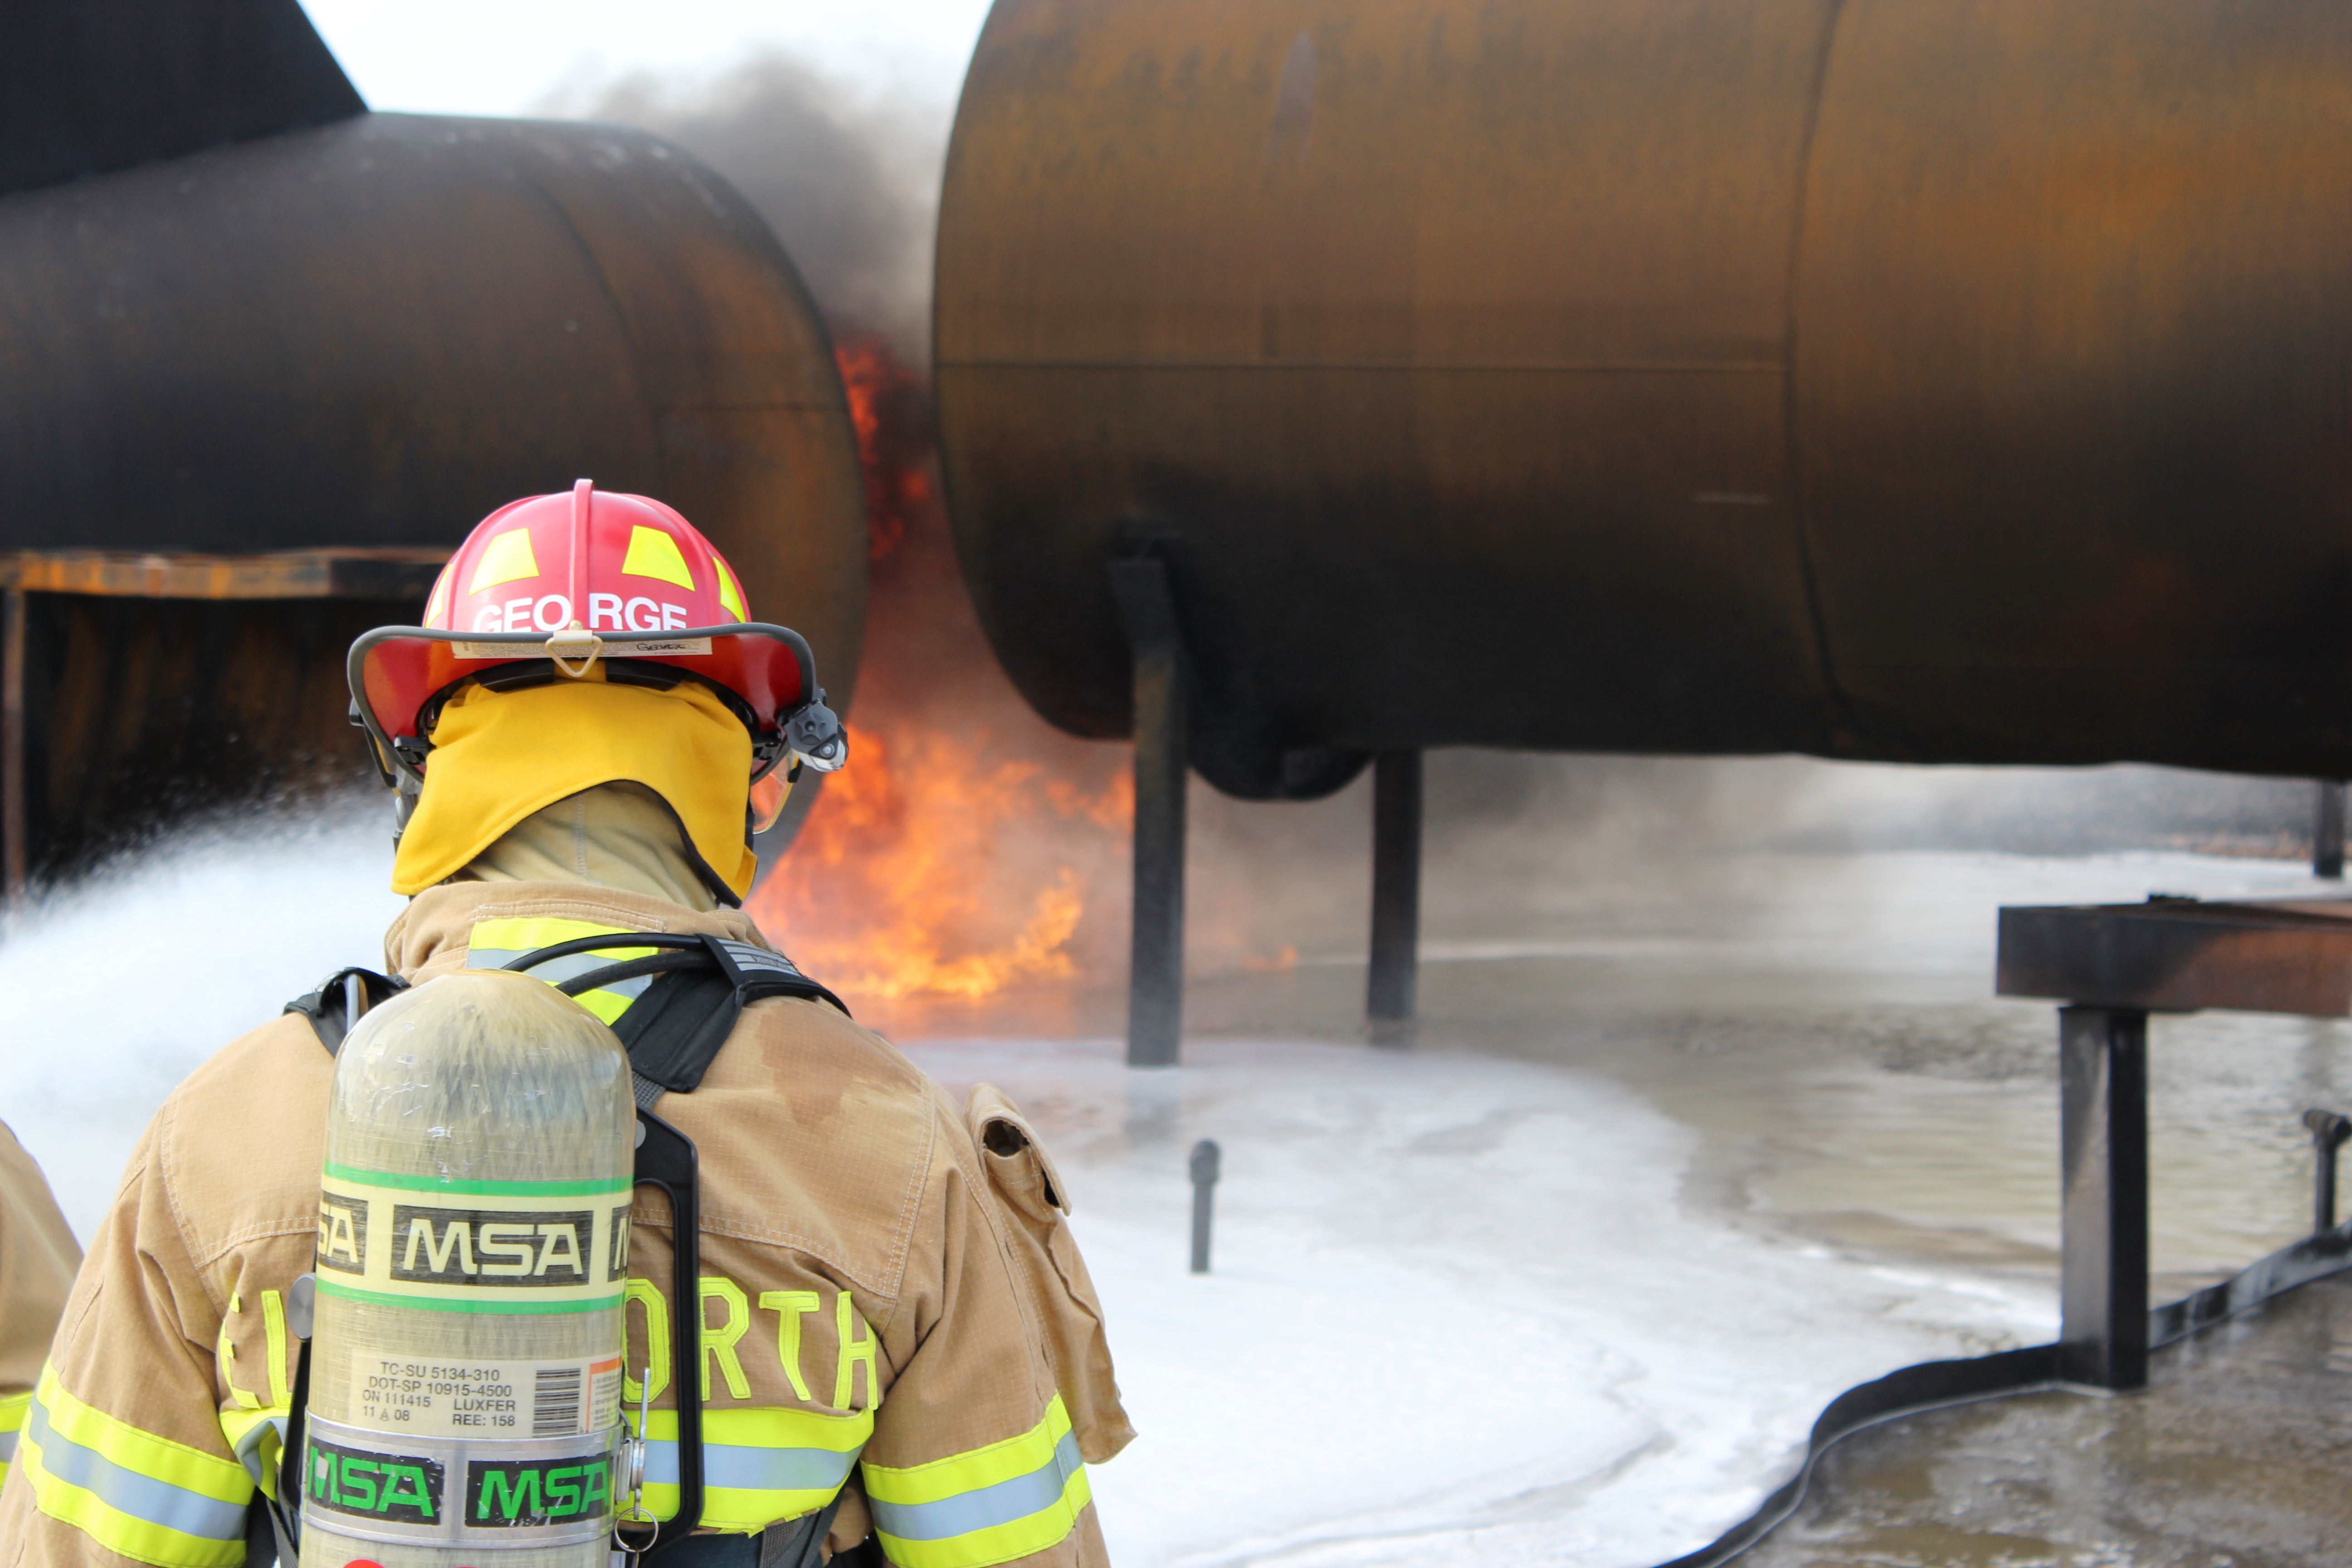 Firefighters putting out a fire at an aircraft firefighting training site